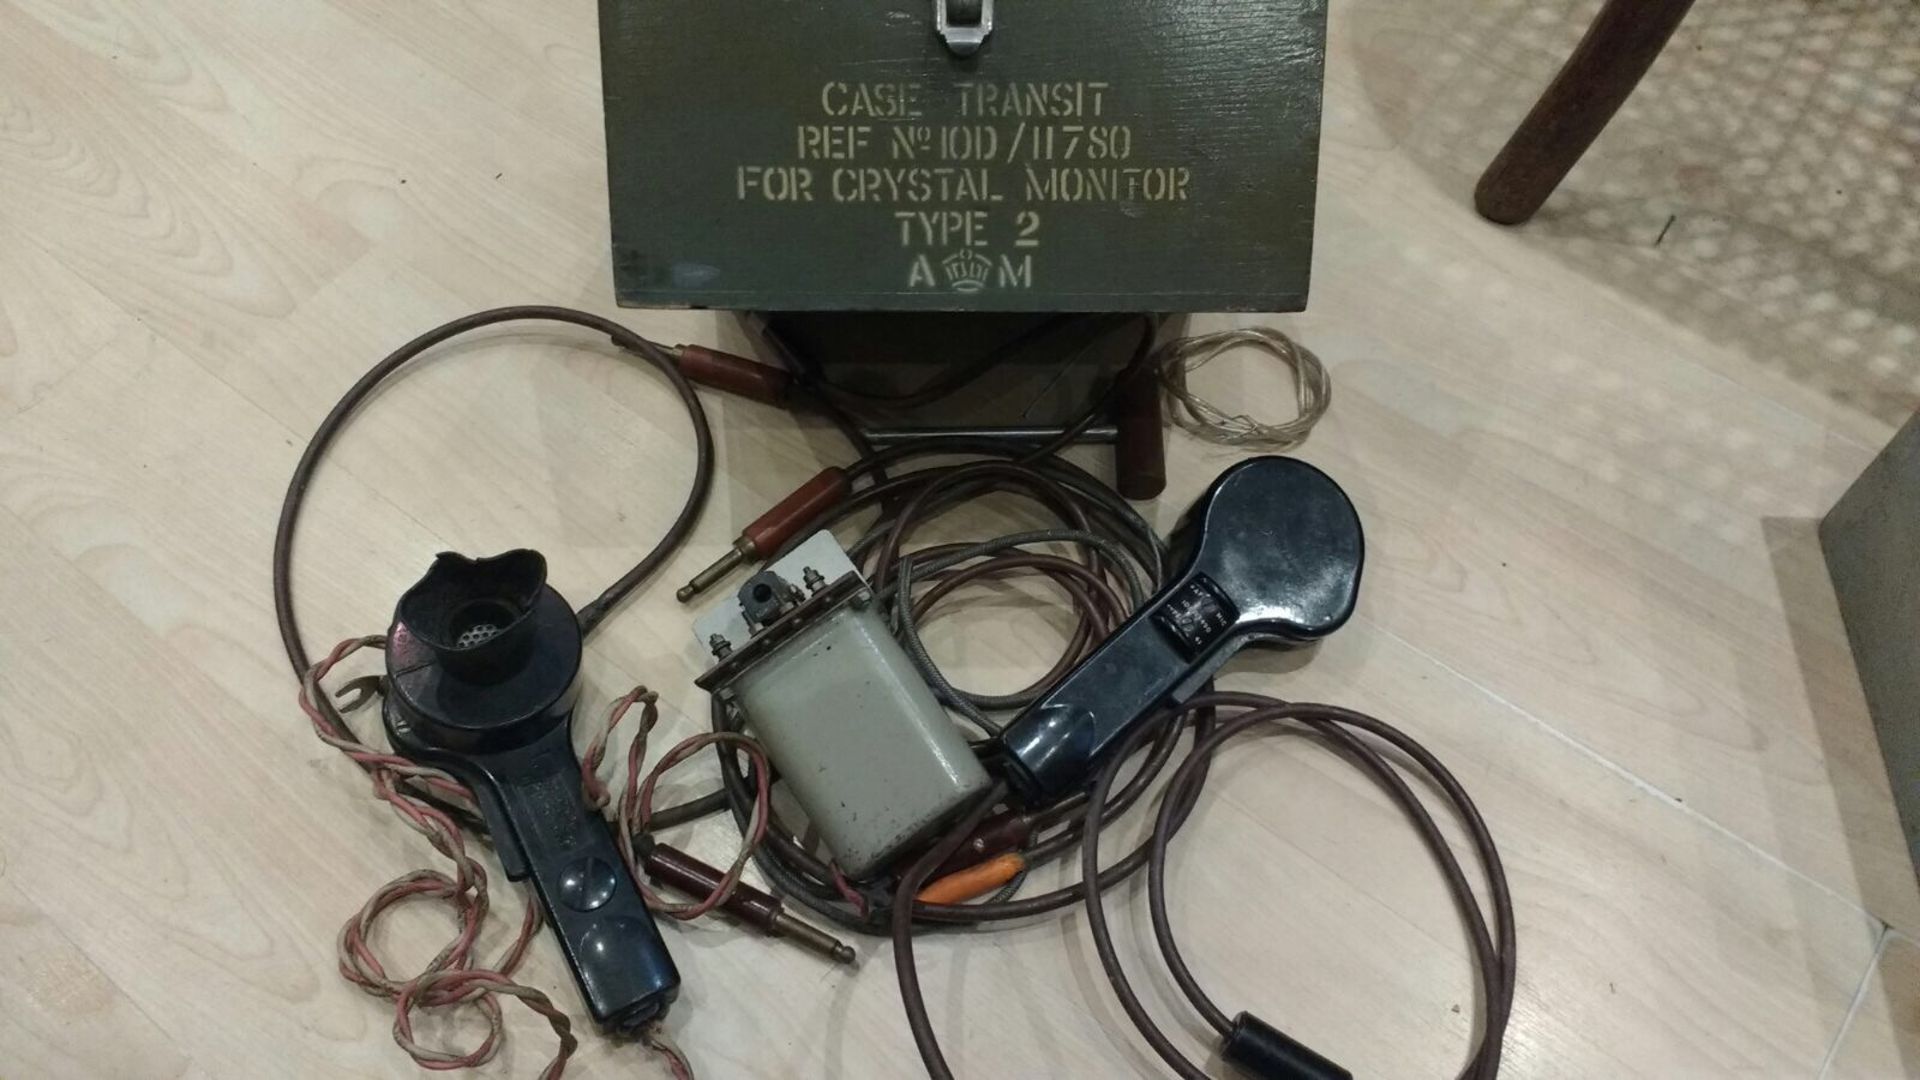 WW2 Crystal Monitor Type 2 in original wooden box